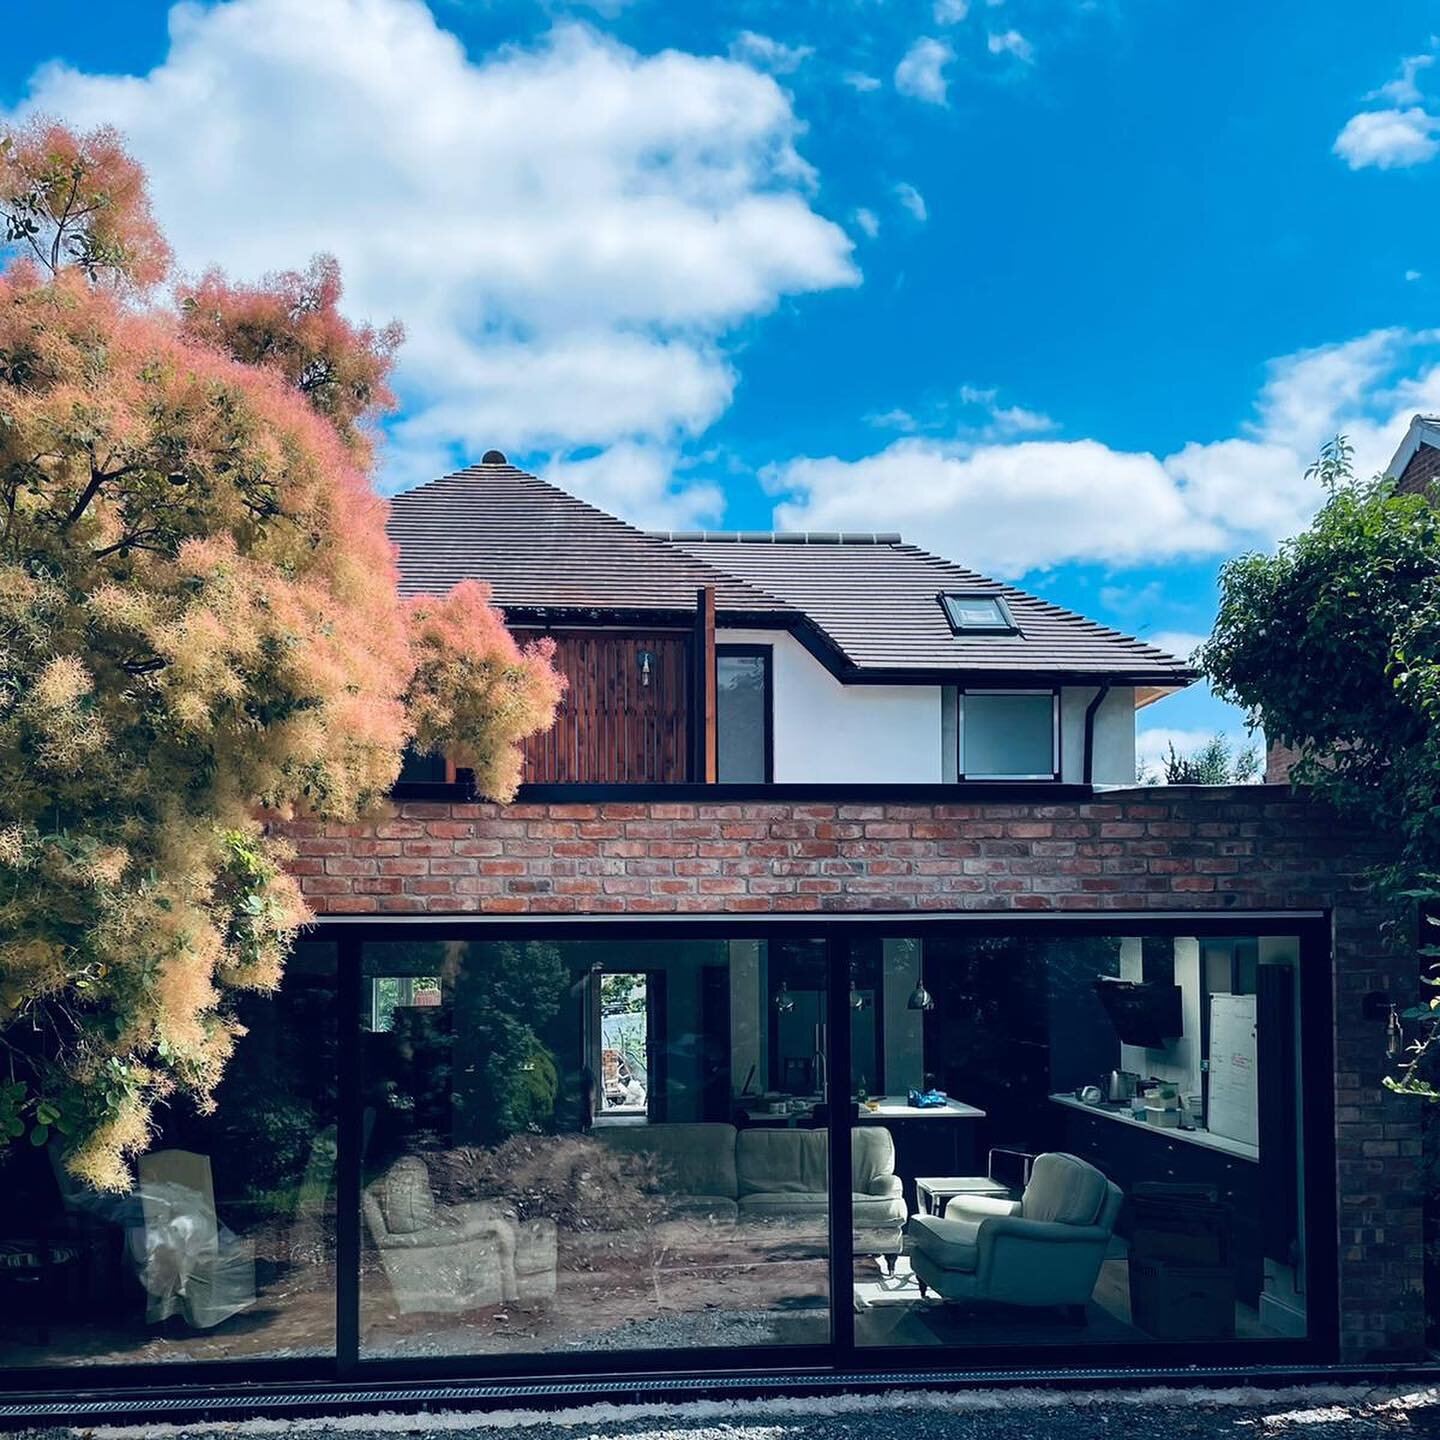 There is something really satisfying about working on a home, I guess you can see the impact your work makes. Steel frame and masonry extension with existing walls removed on the ground floor to form a gorgeous new open plan living space. Wonderful d